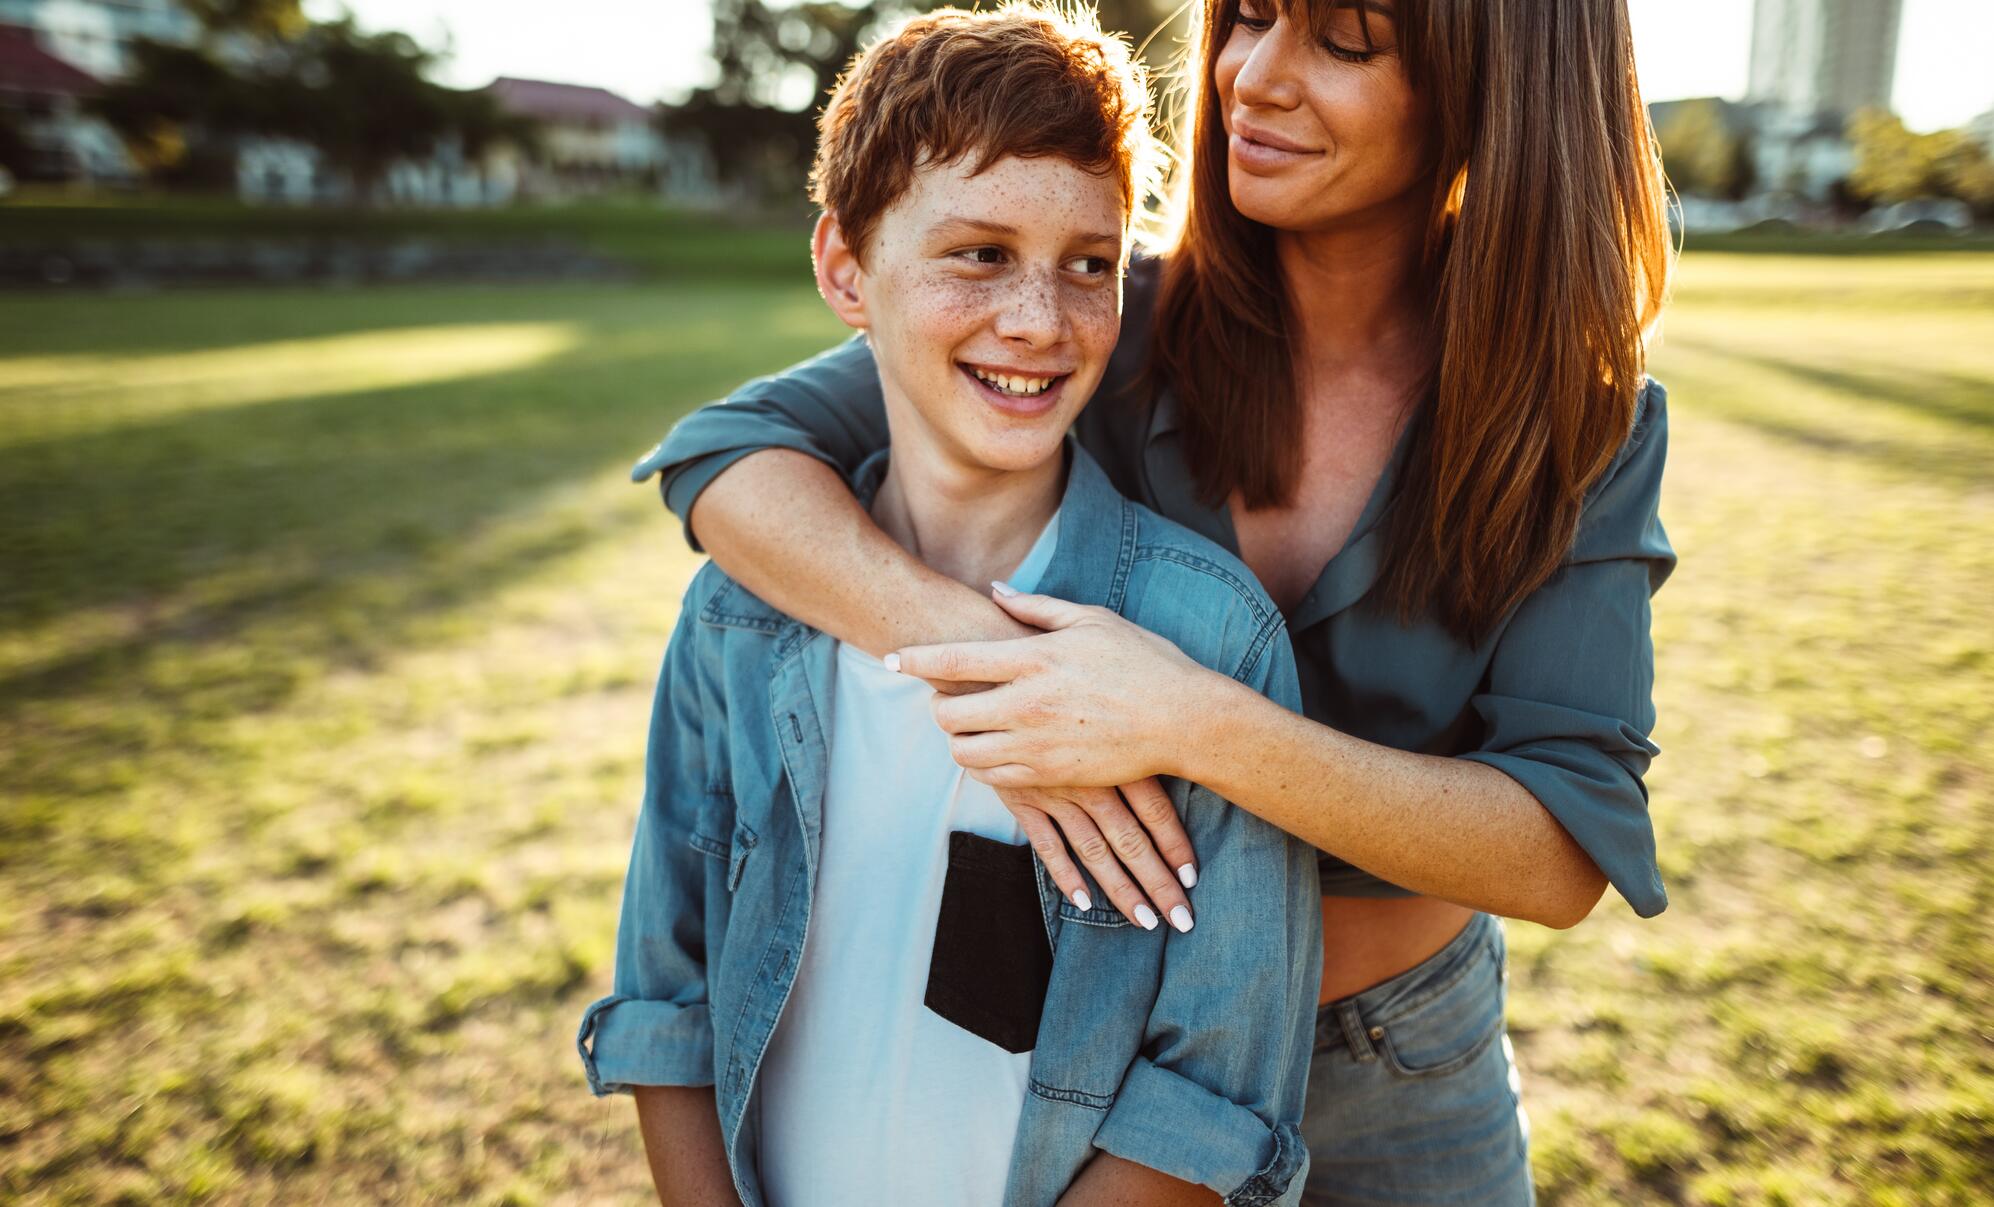 AD_LIFE-MOMENTS_MOTHER-AND-SON_LARGE_2021